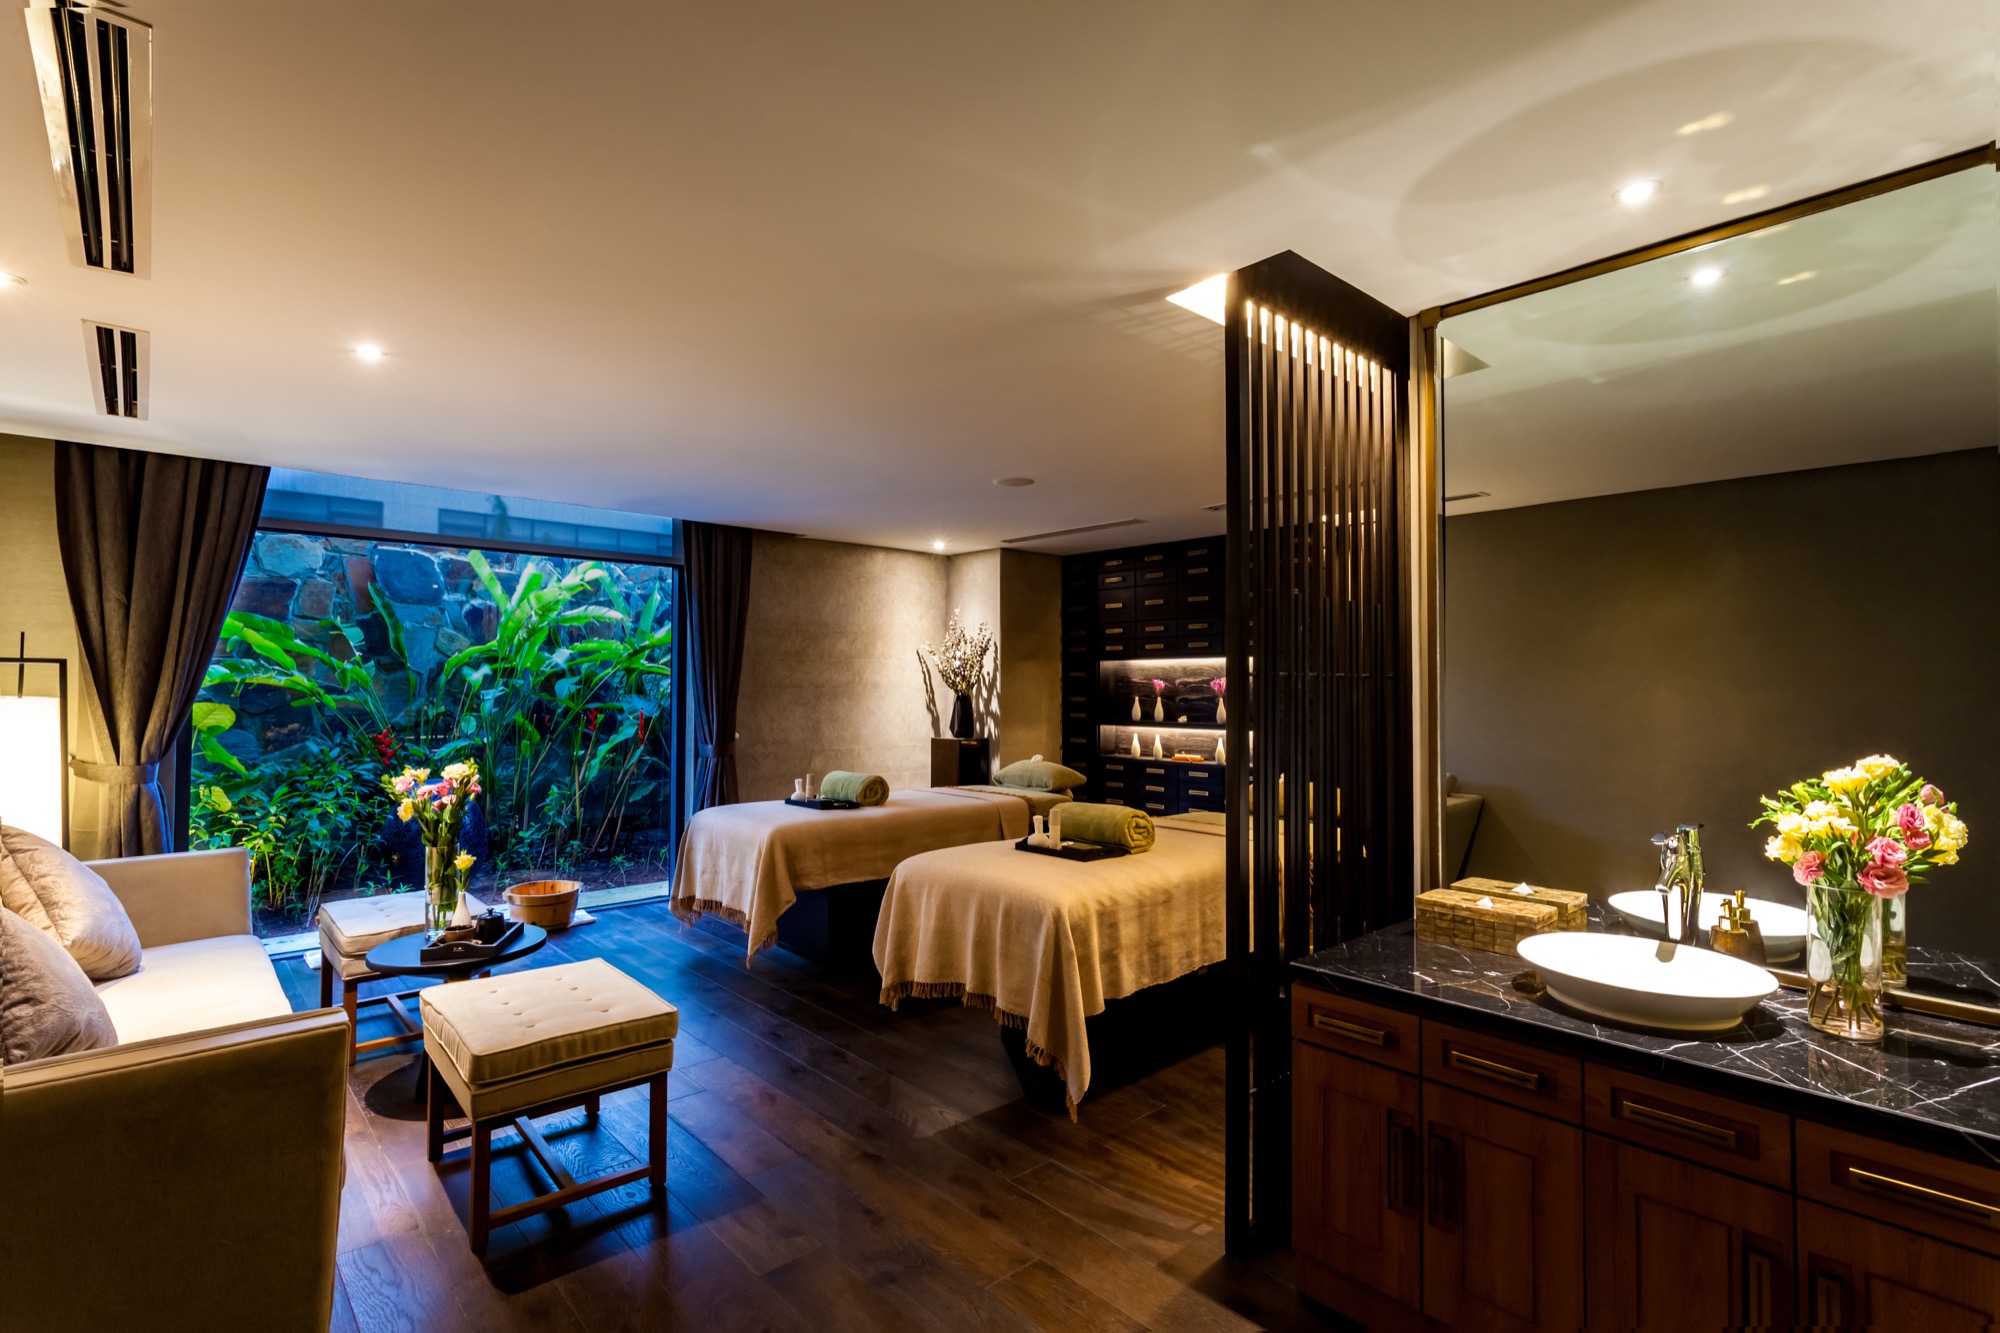 Spa Treatments To Do At Home